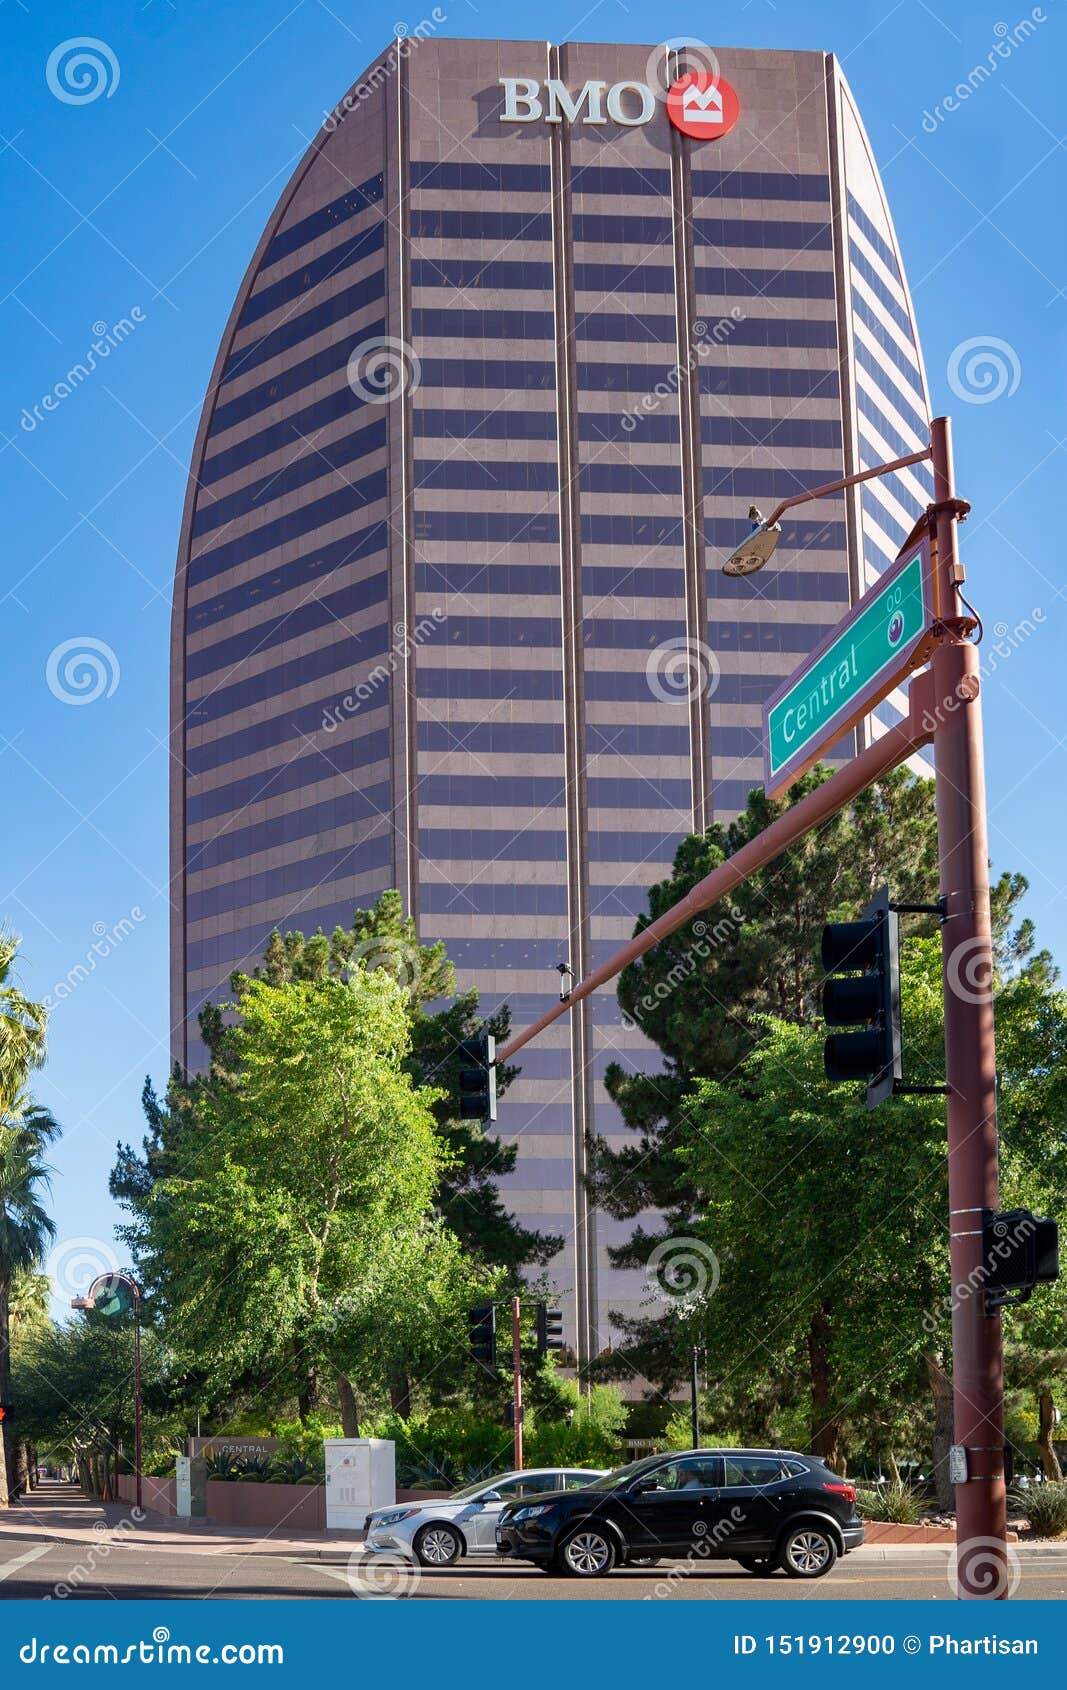 The Bmo Building In Phoenix Az Editorial Image Image Of Bank